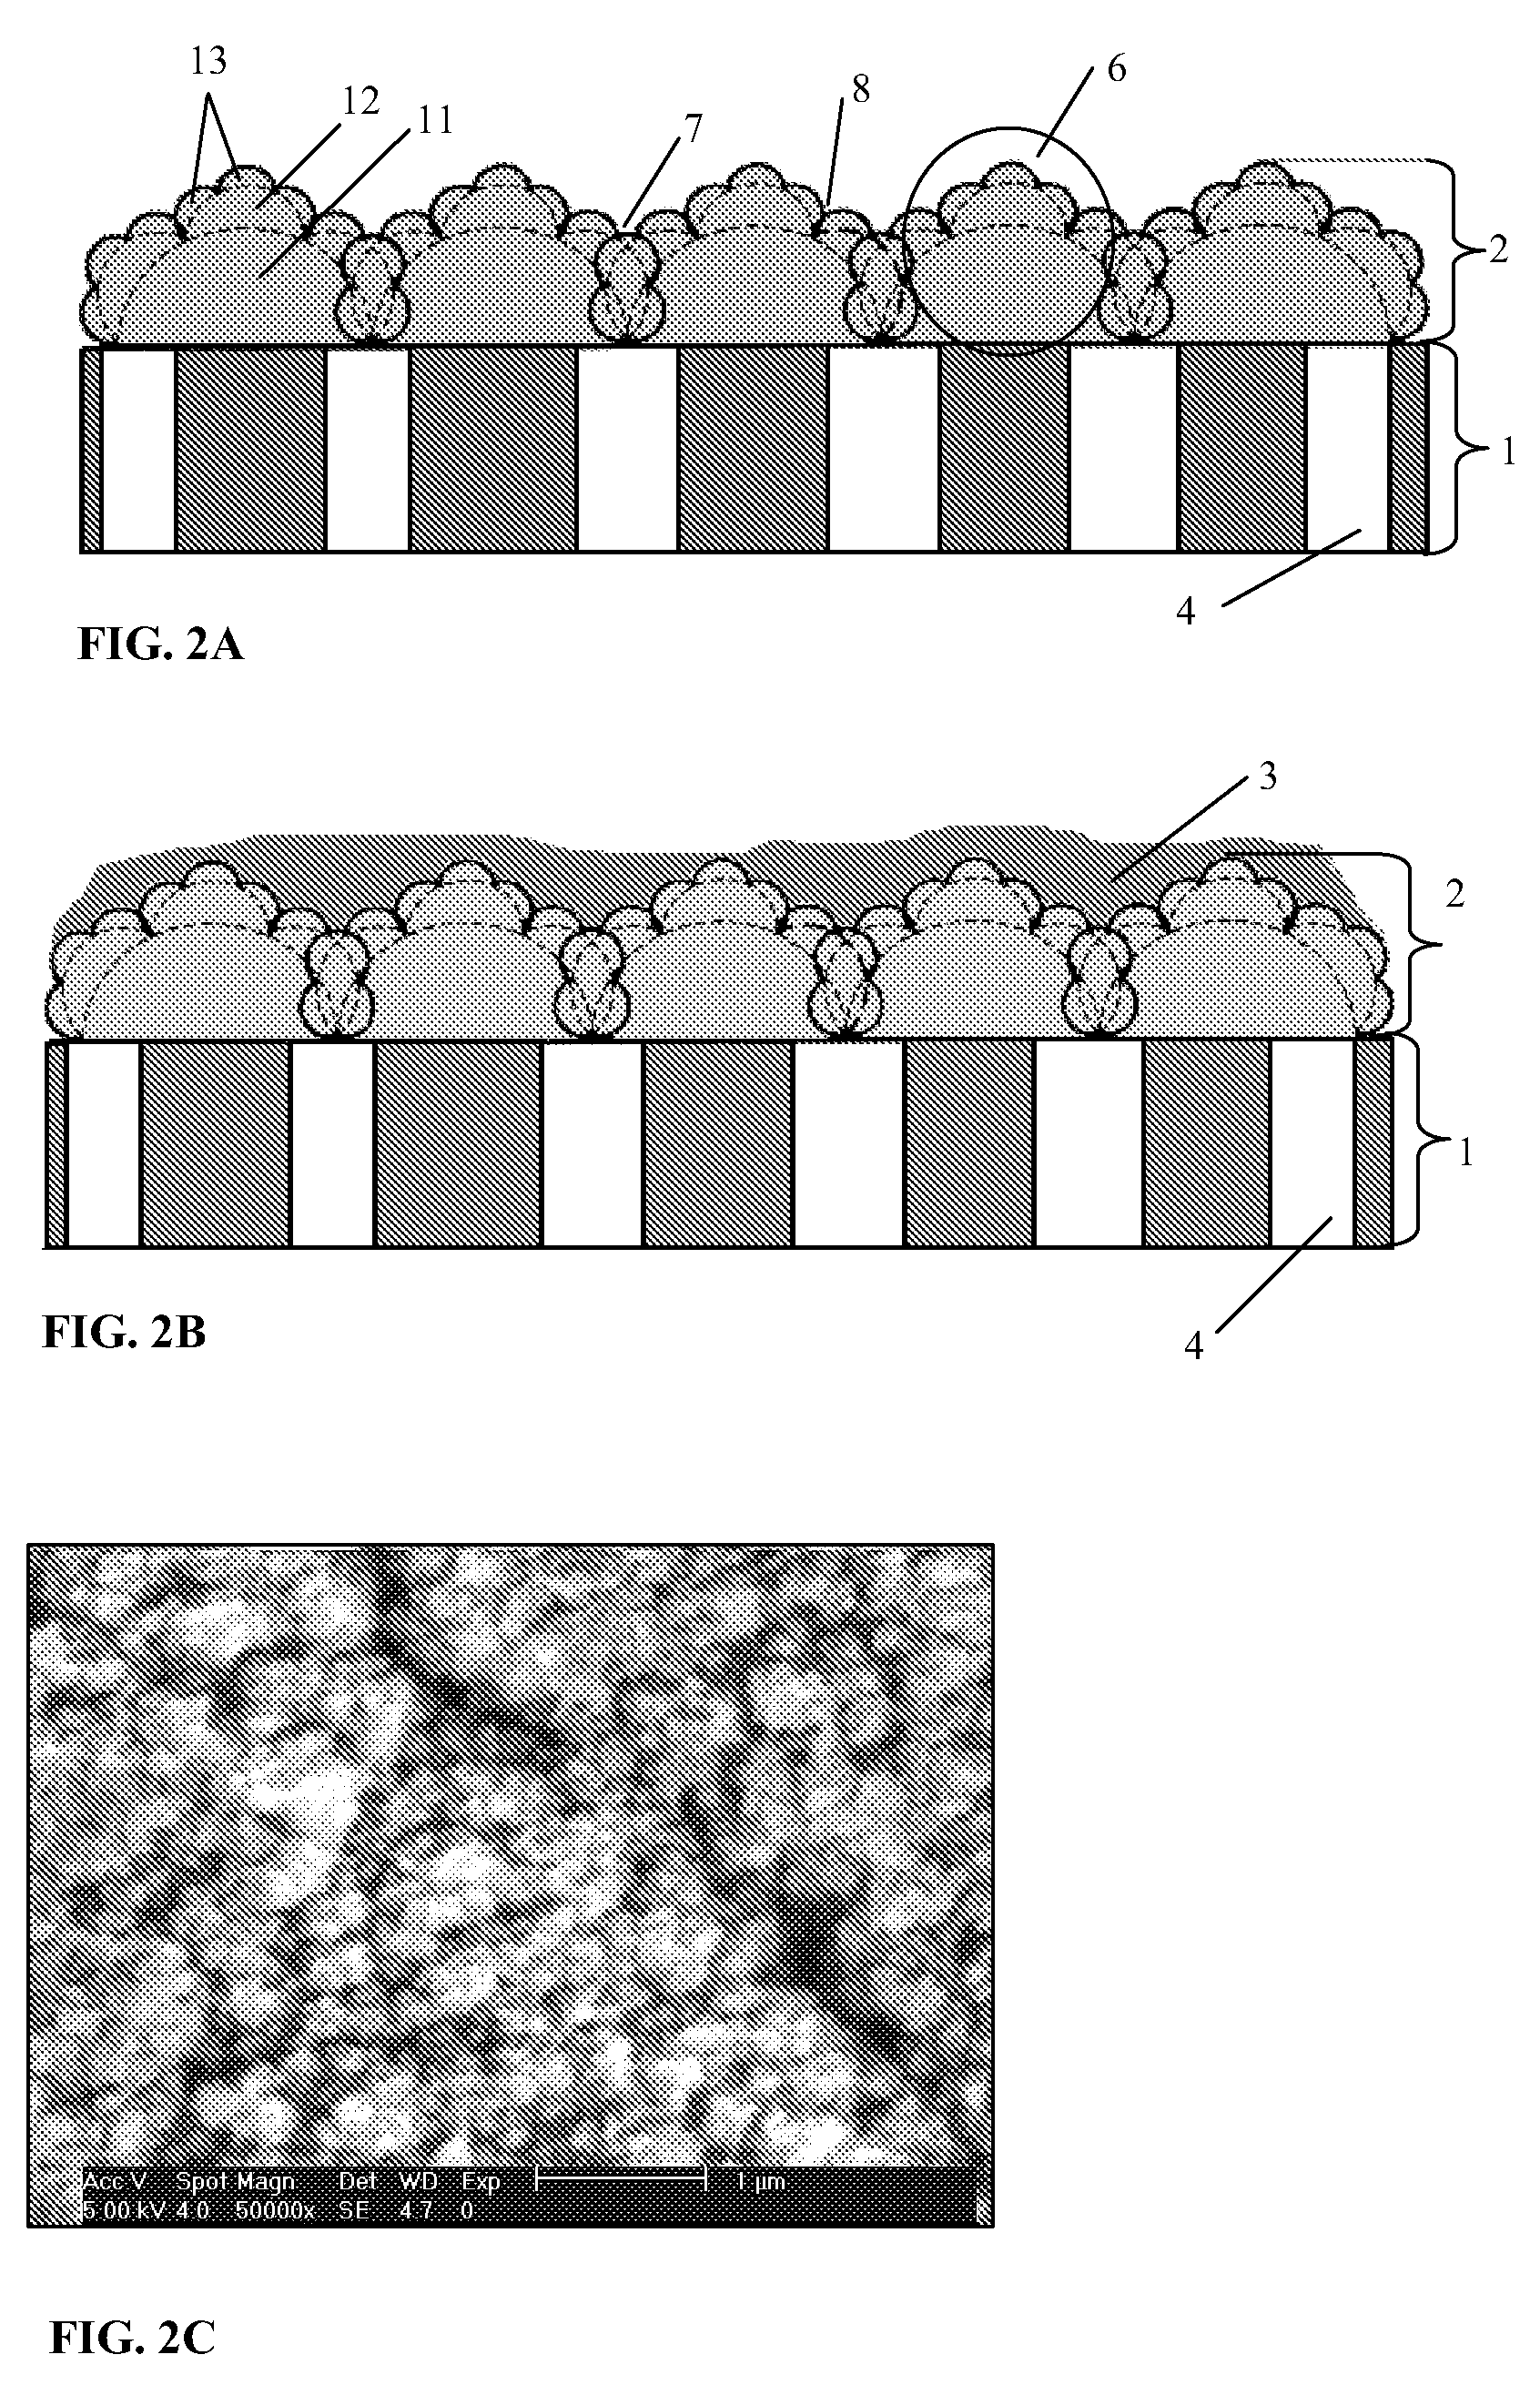 Composite inorganic membrane for separation in fluid systems